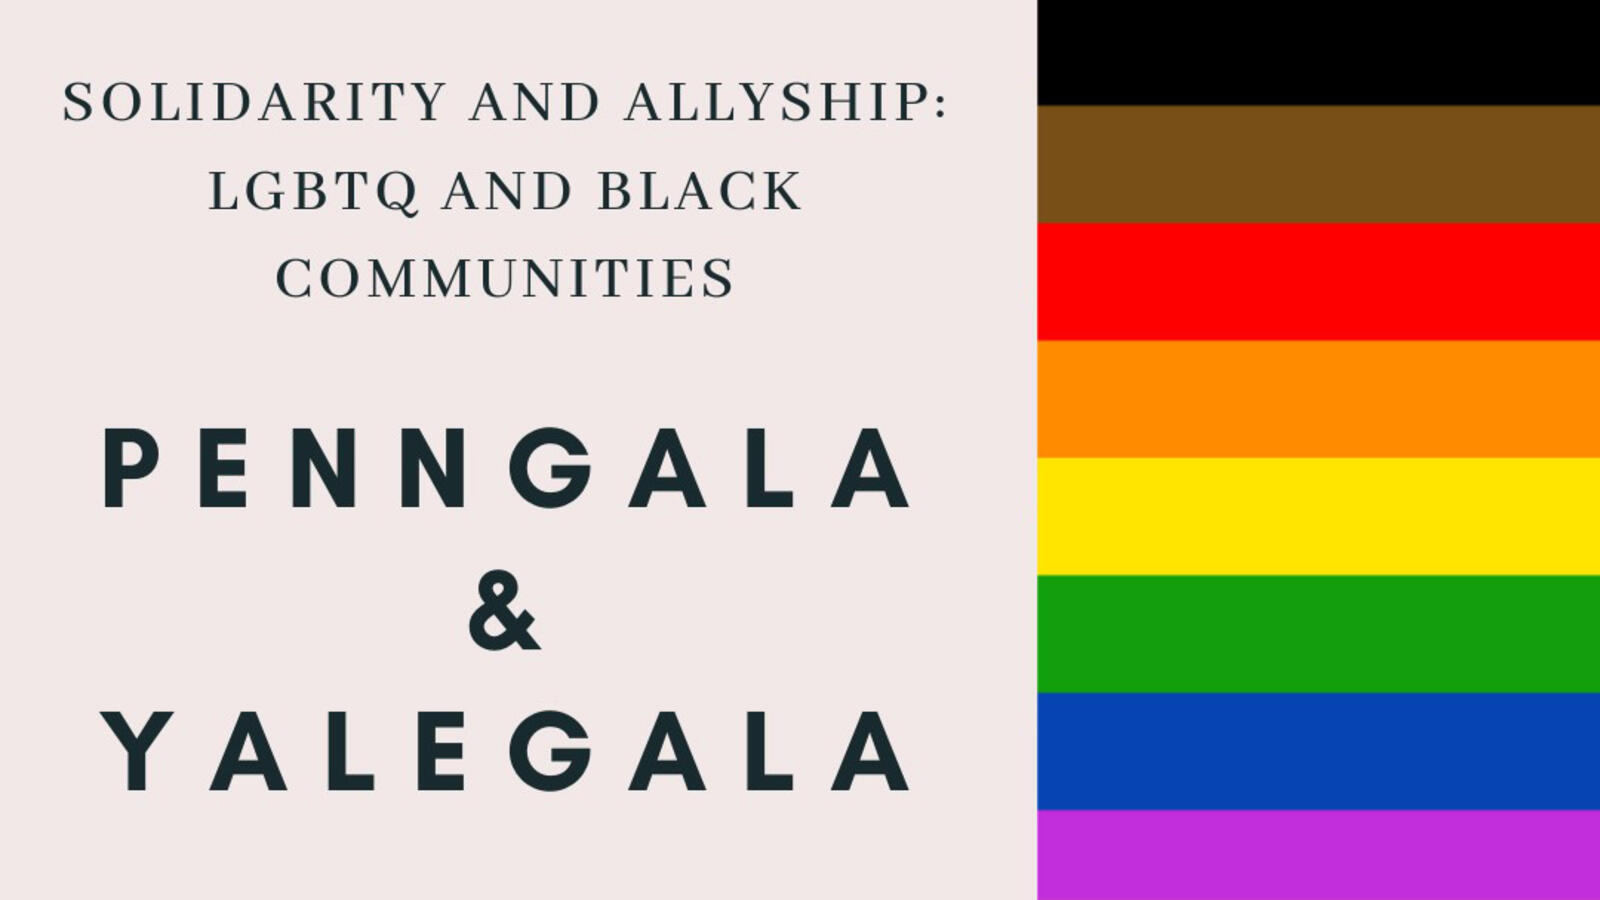 Graphic for webinar, "Solidarity and Allyship: LGBTQ and Black Communities"